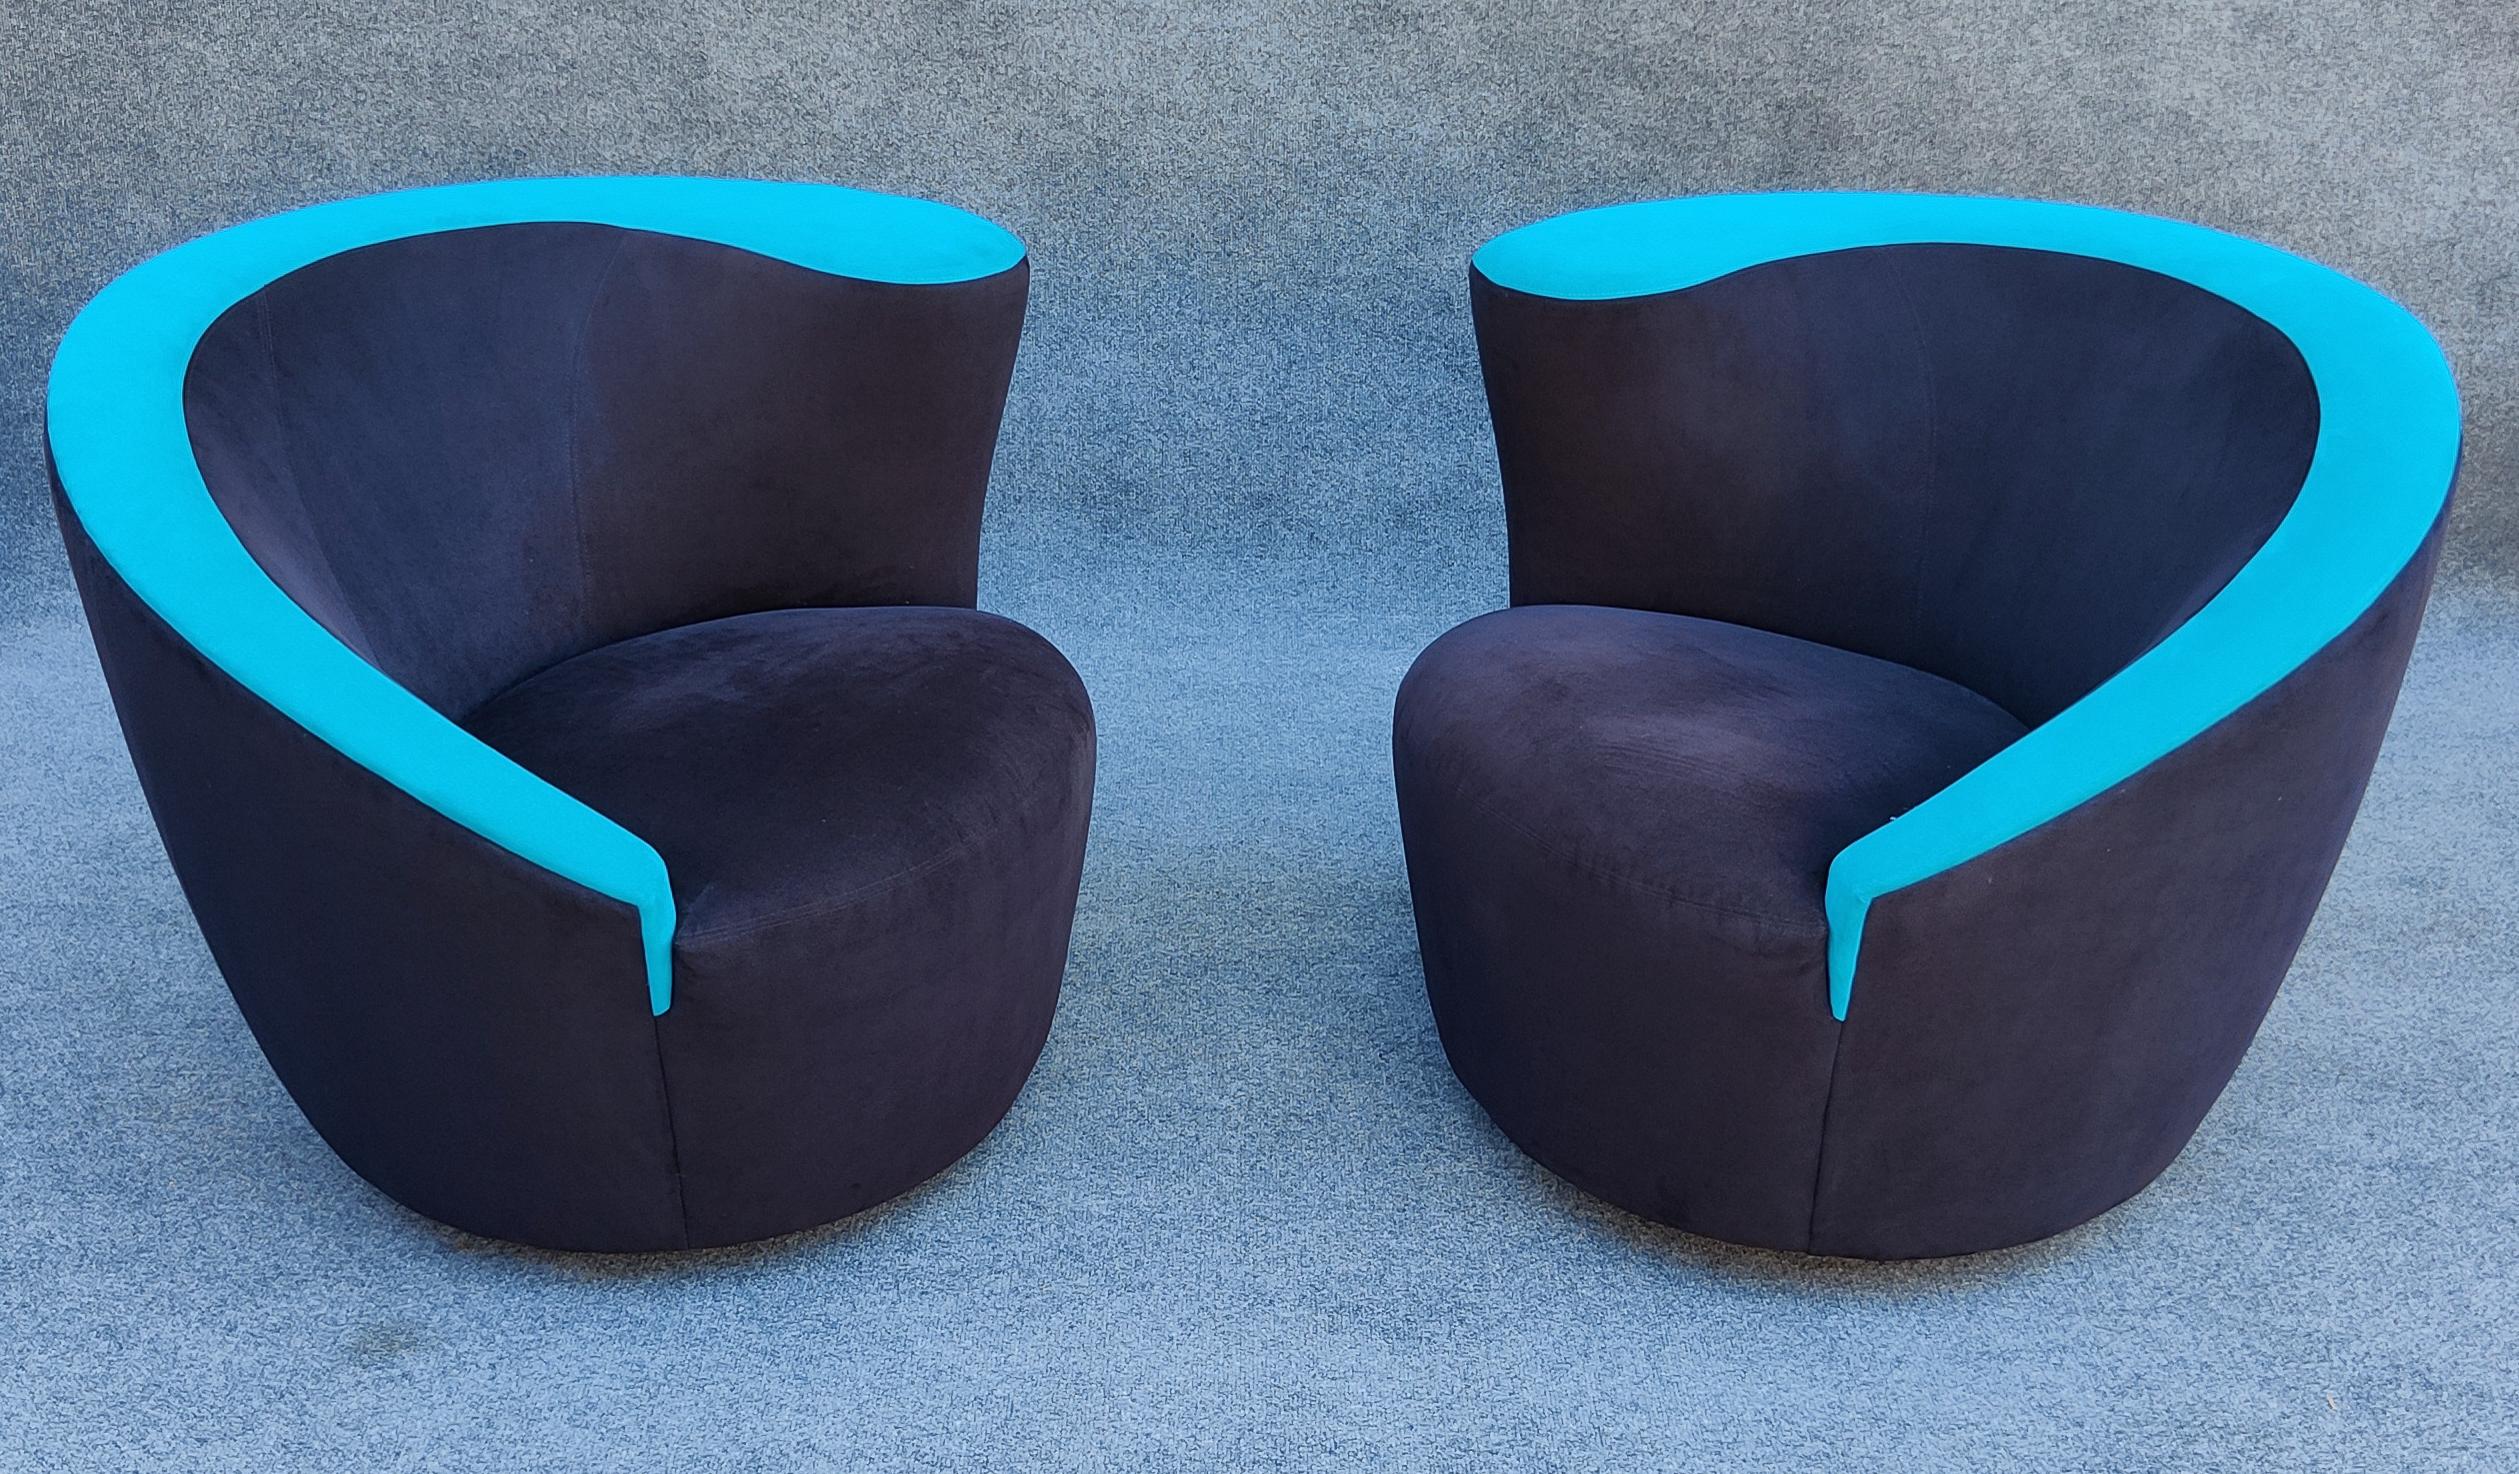 Designed by Vladimir Kagan for prestigious manufacturer Directional, this symmetrical (left and right) pair of chairs are rare and exclusive. Their distinct and organic design features a curved, shell-like shape made of suede upholstery over a